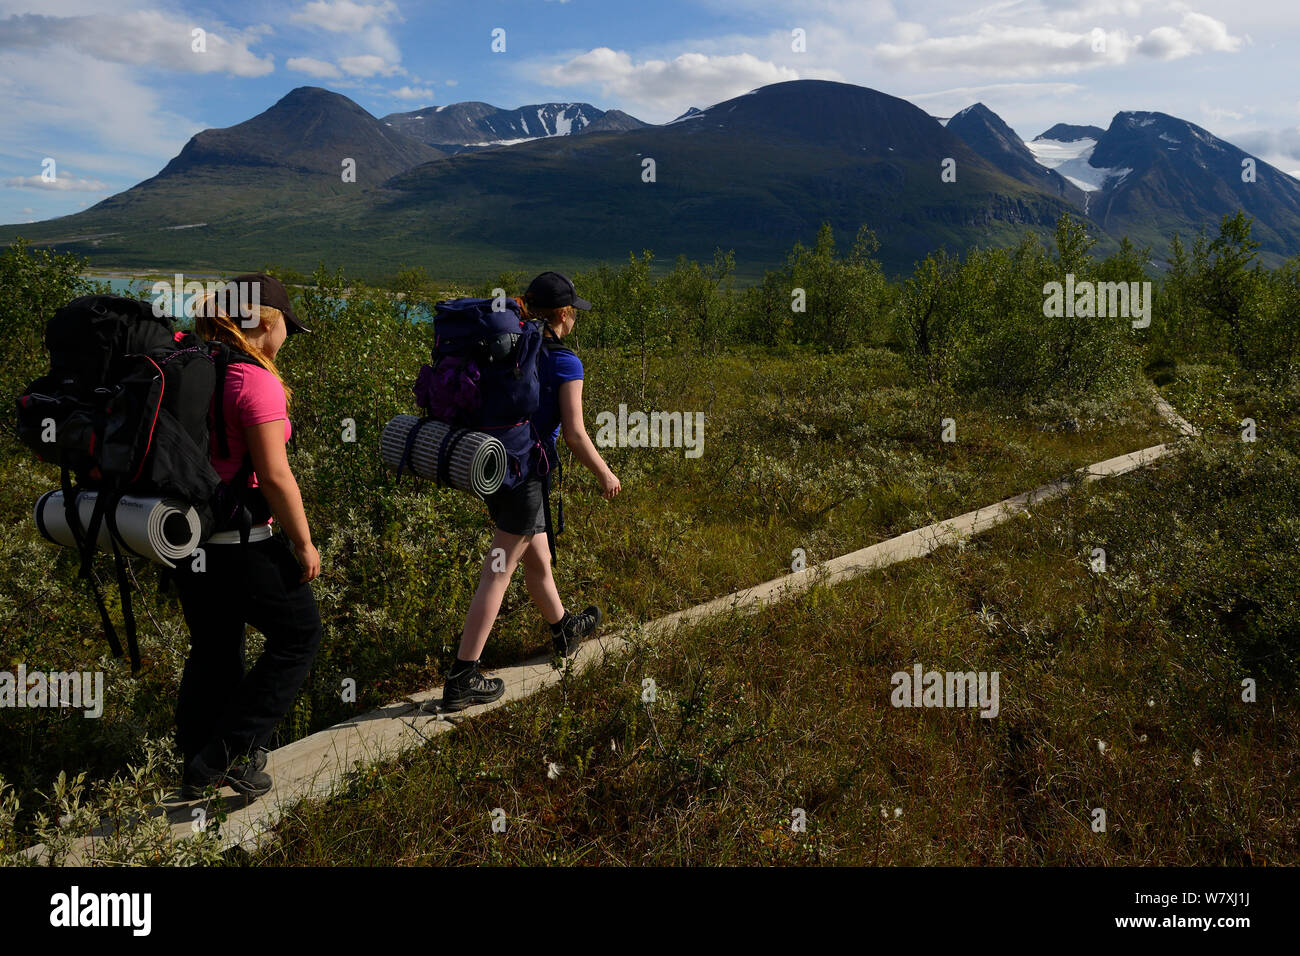 Two teenage girls on hiking trip on the Laponia Circuit, along the Padjelantaleden trail, Padjelanta National Park and Sarek National Park, Norrbotten, Lapland, Sweden. Model released Stock Photo